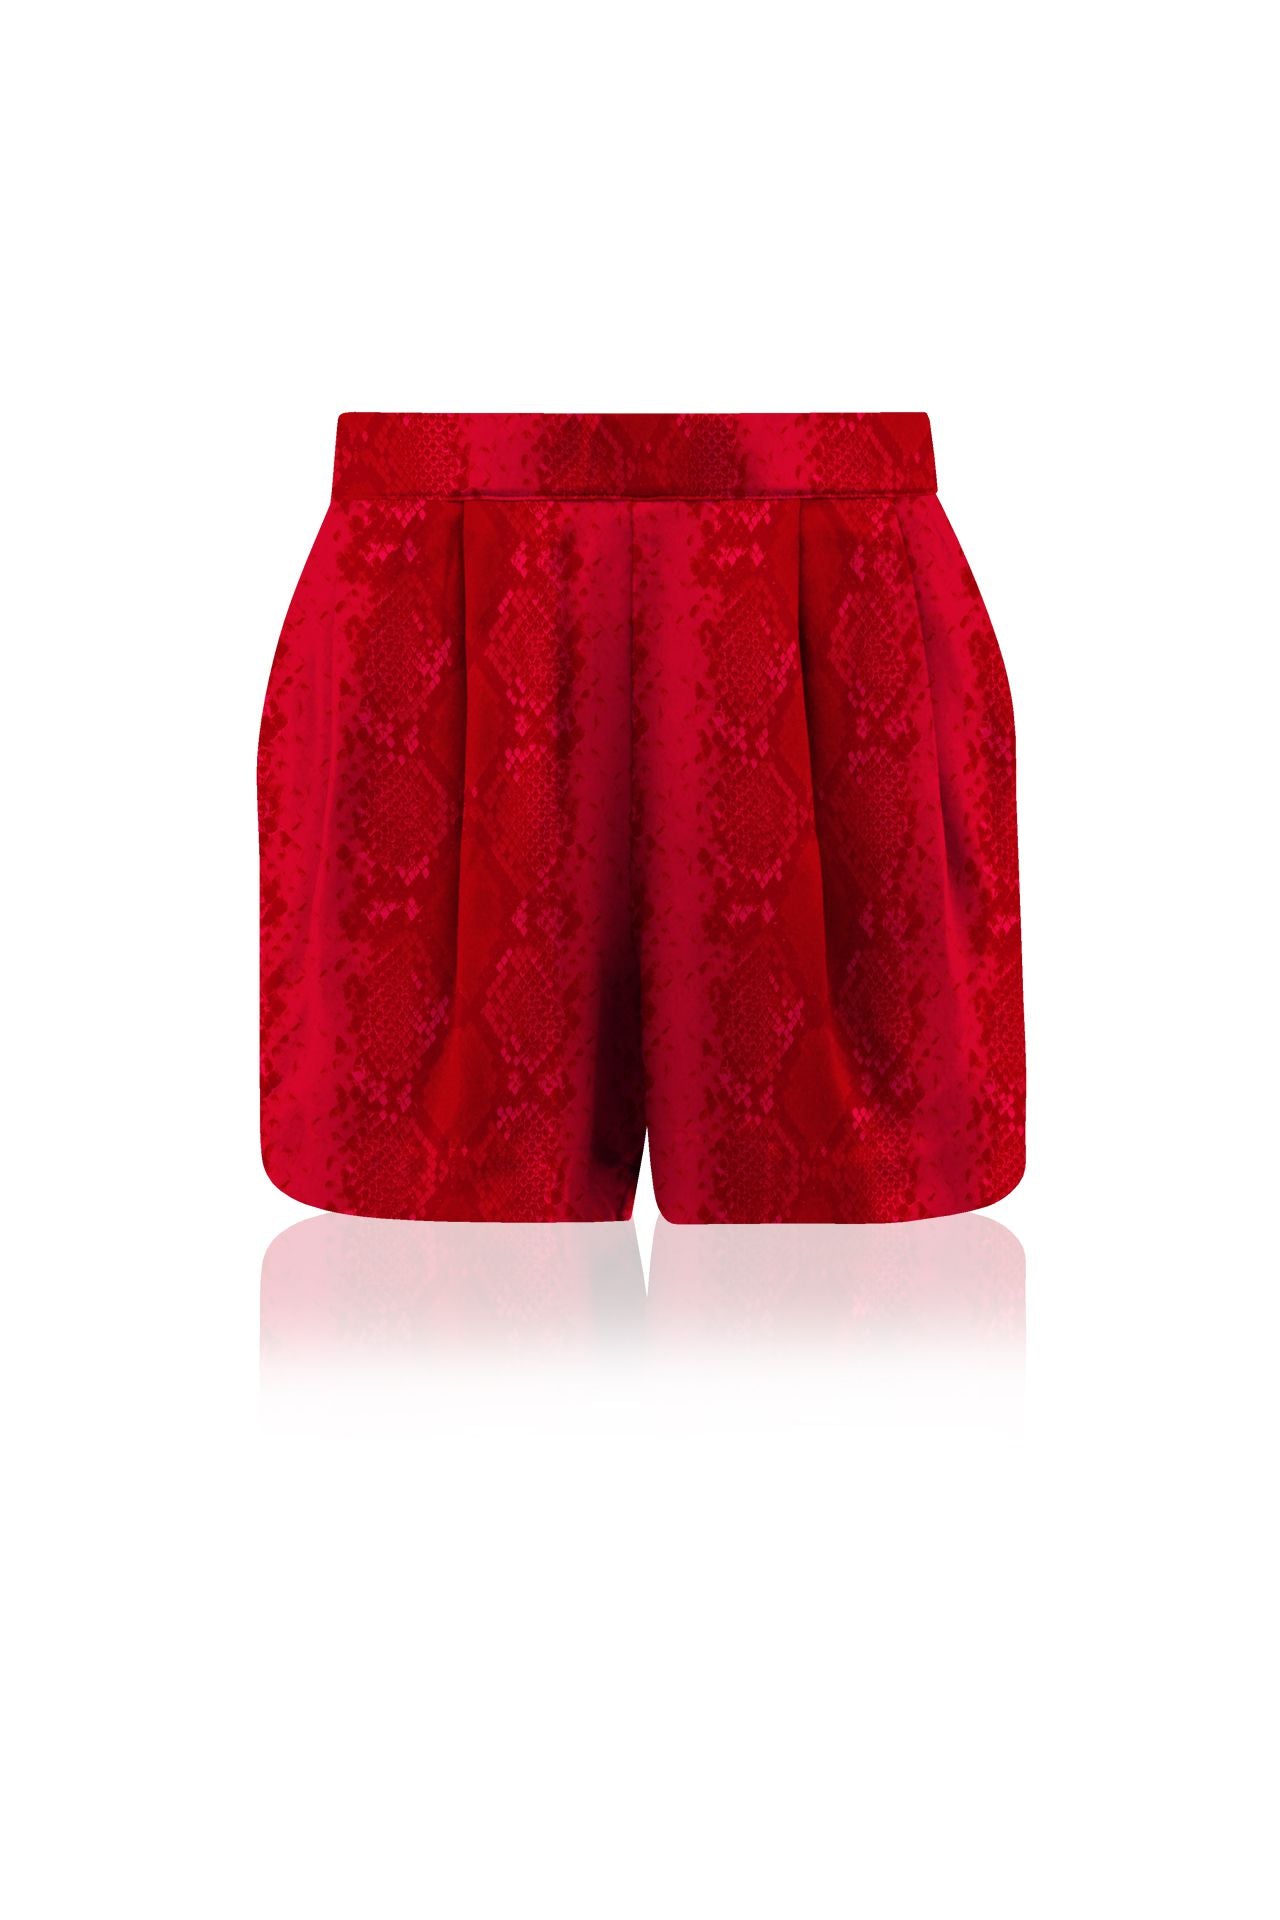 Blood Stone Shorts Made With Cupro